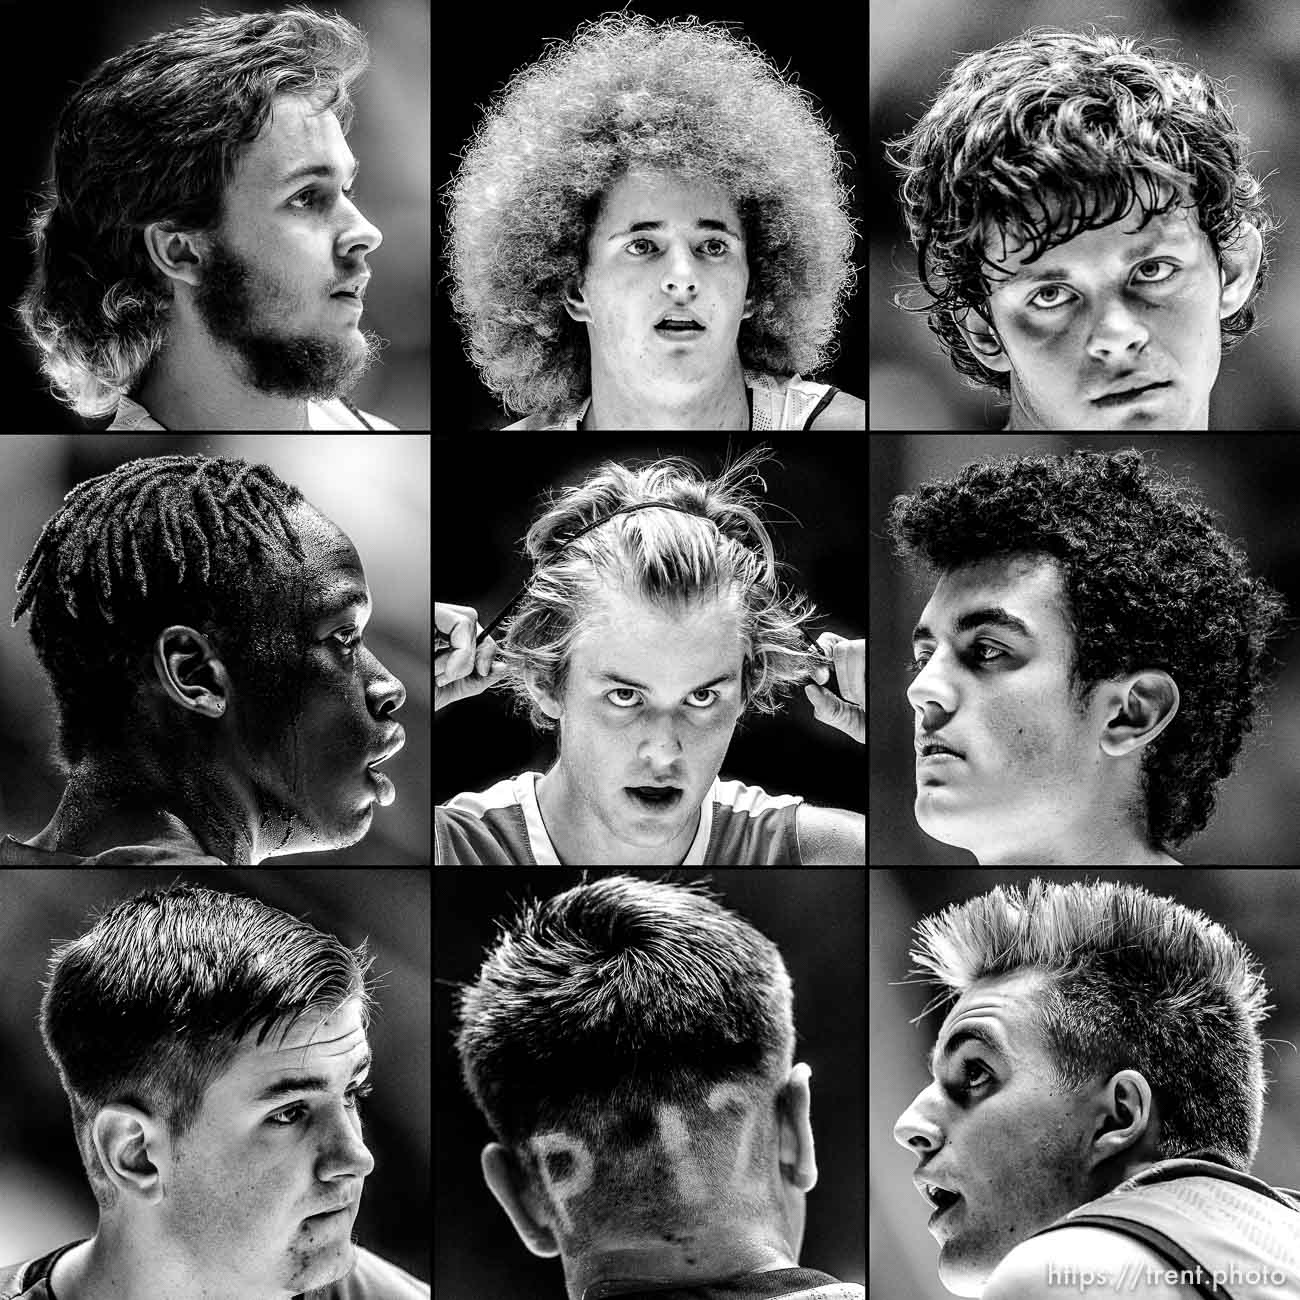 The Hairstyles of High School Basketball